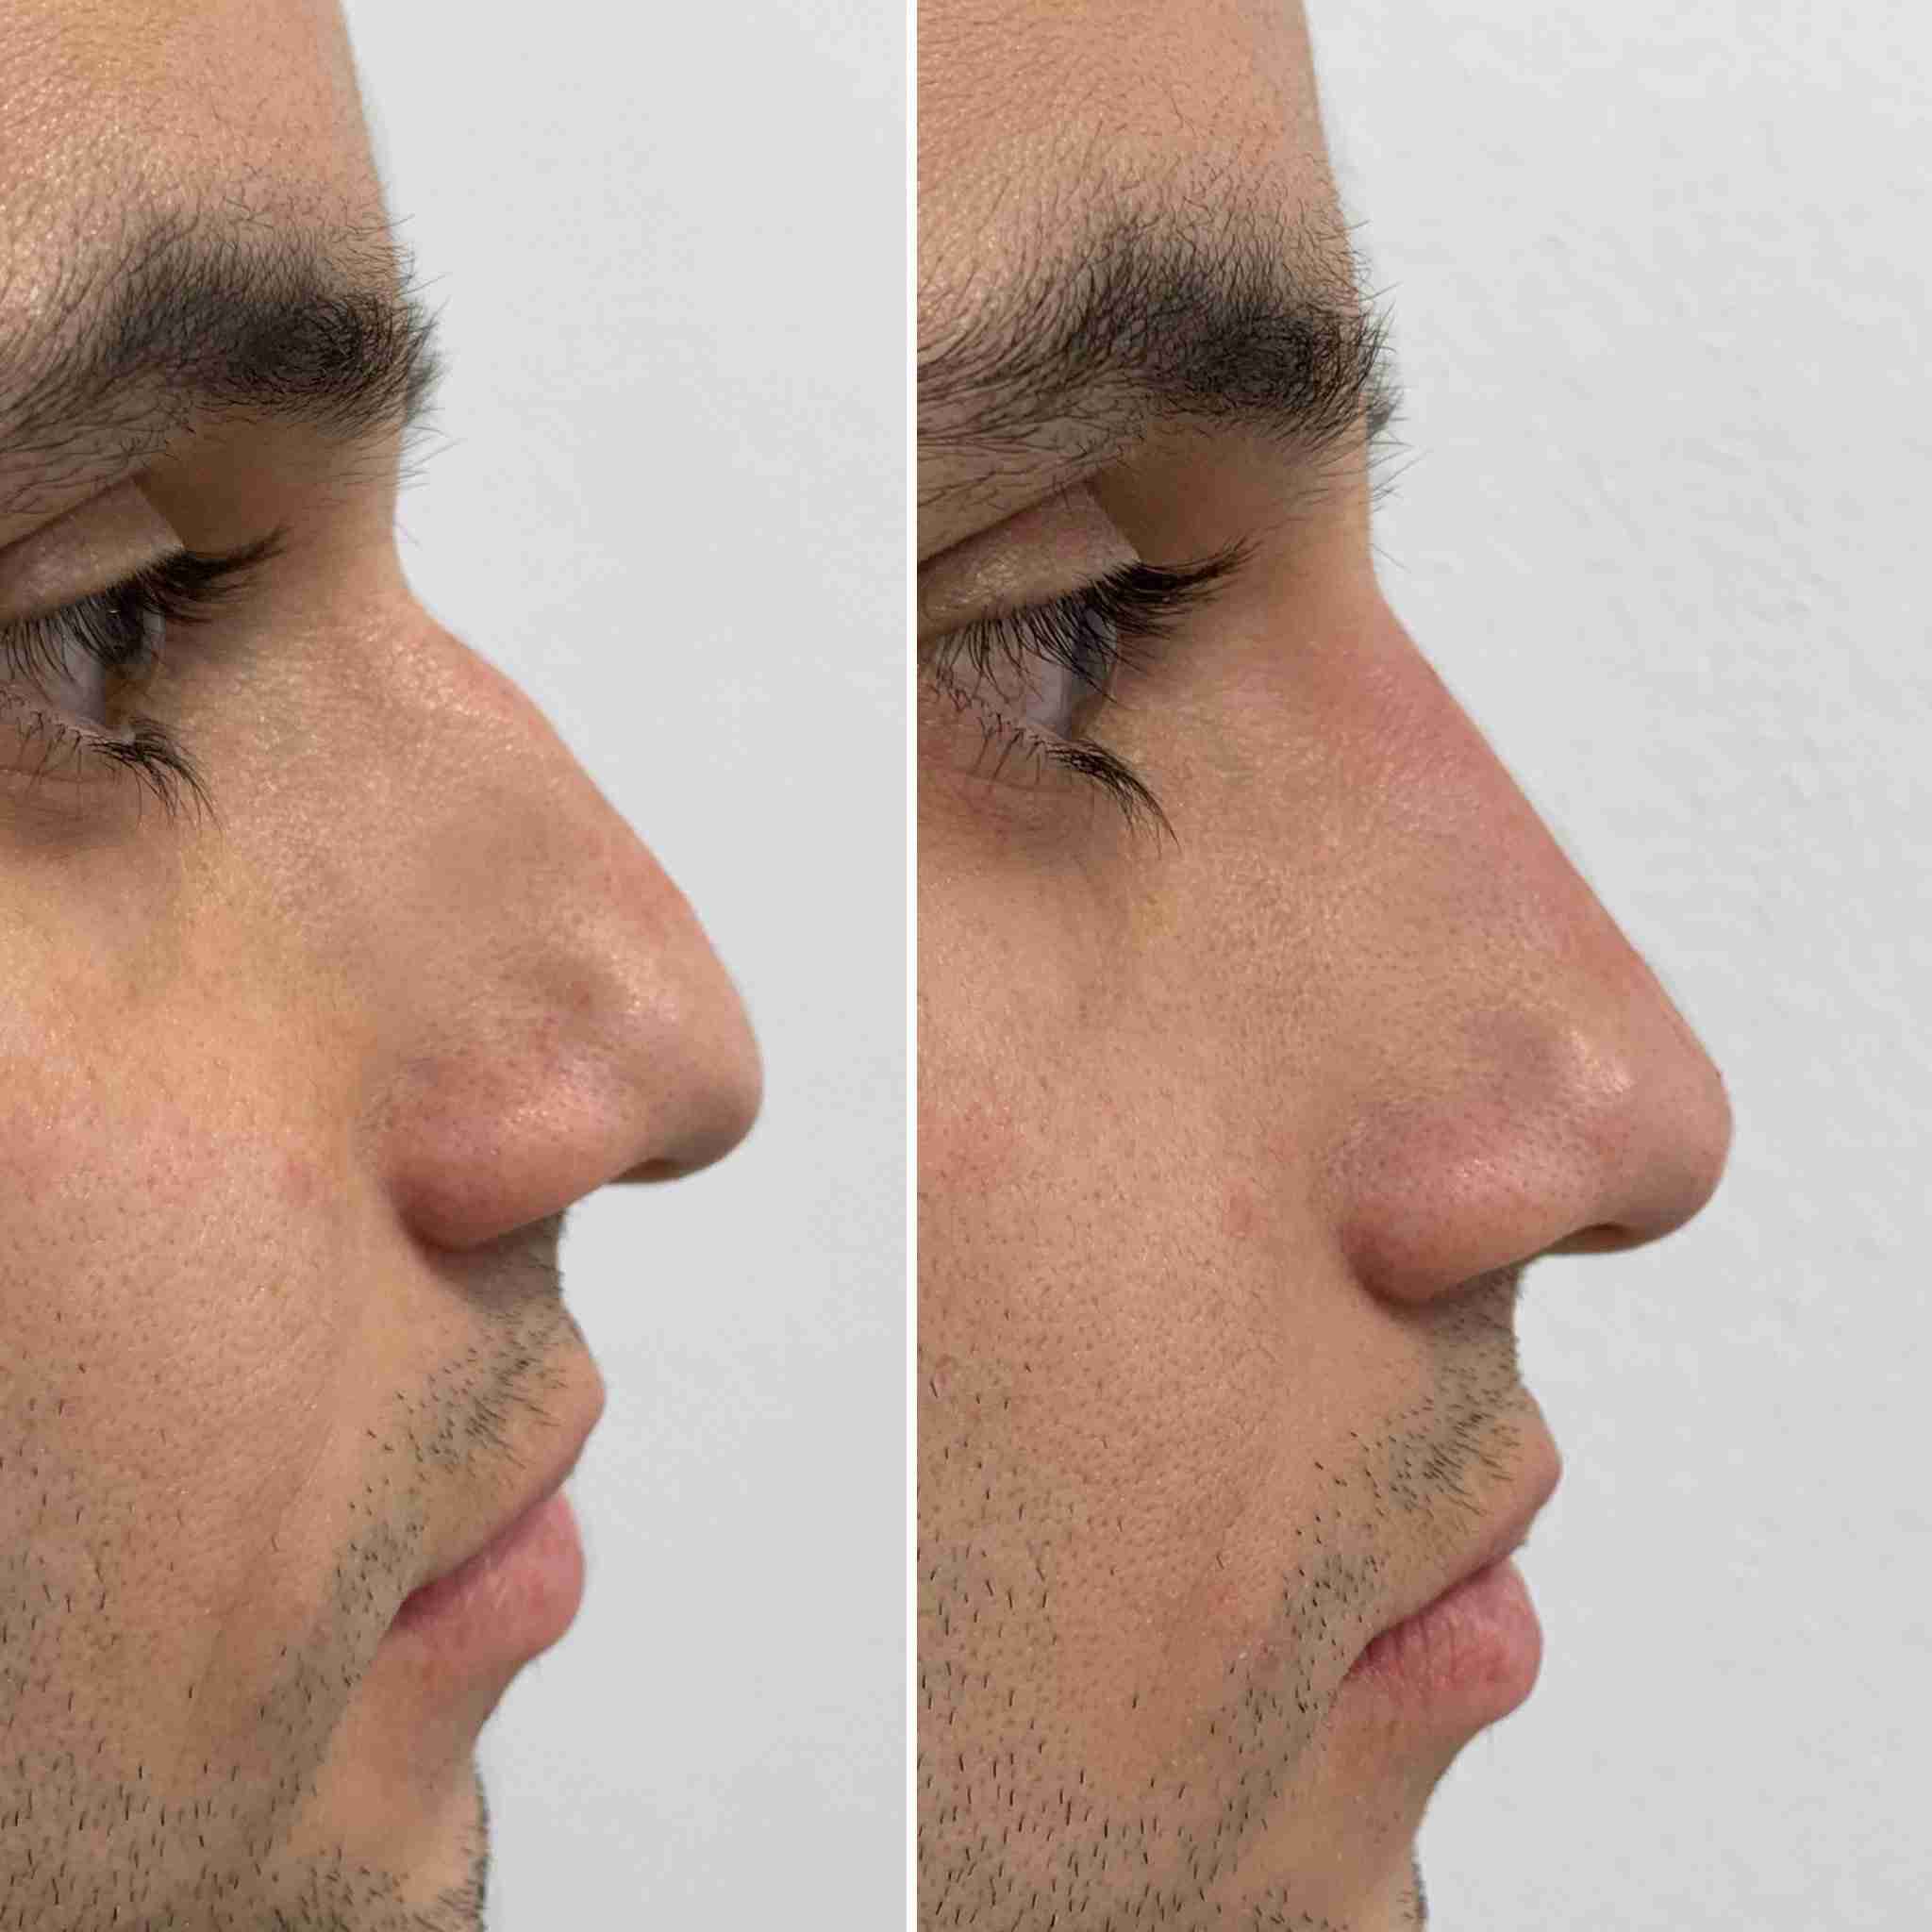 Difference after nose filler